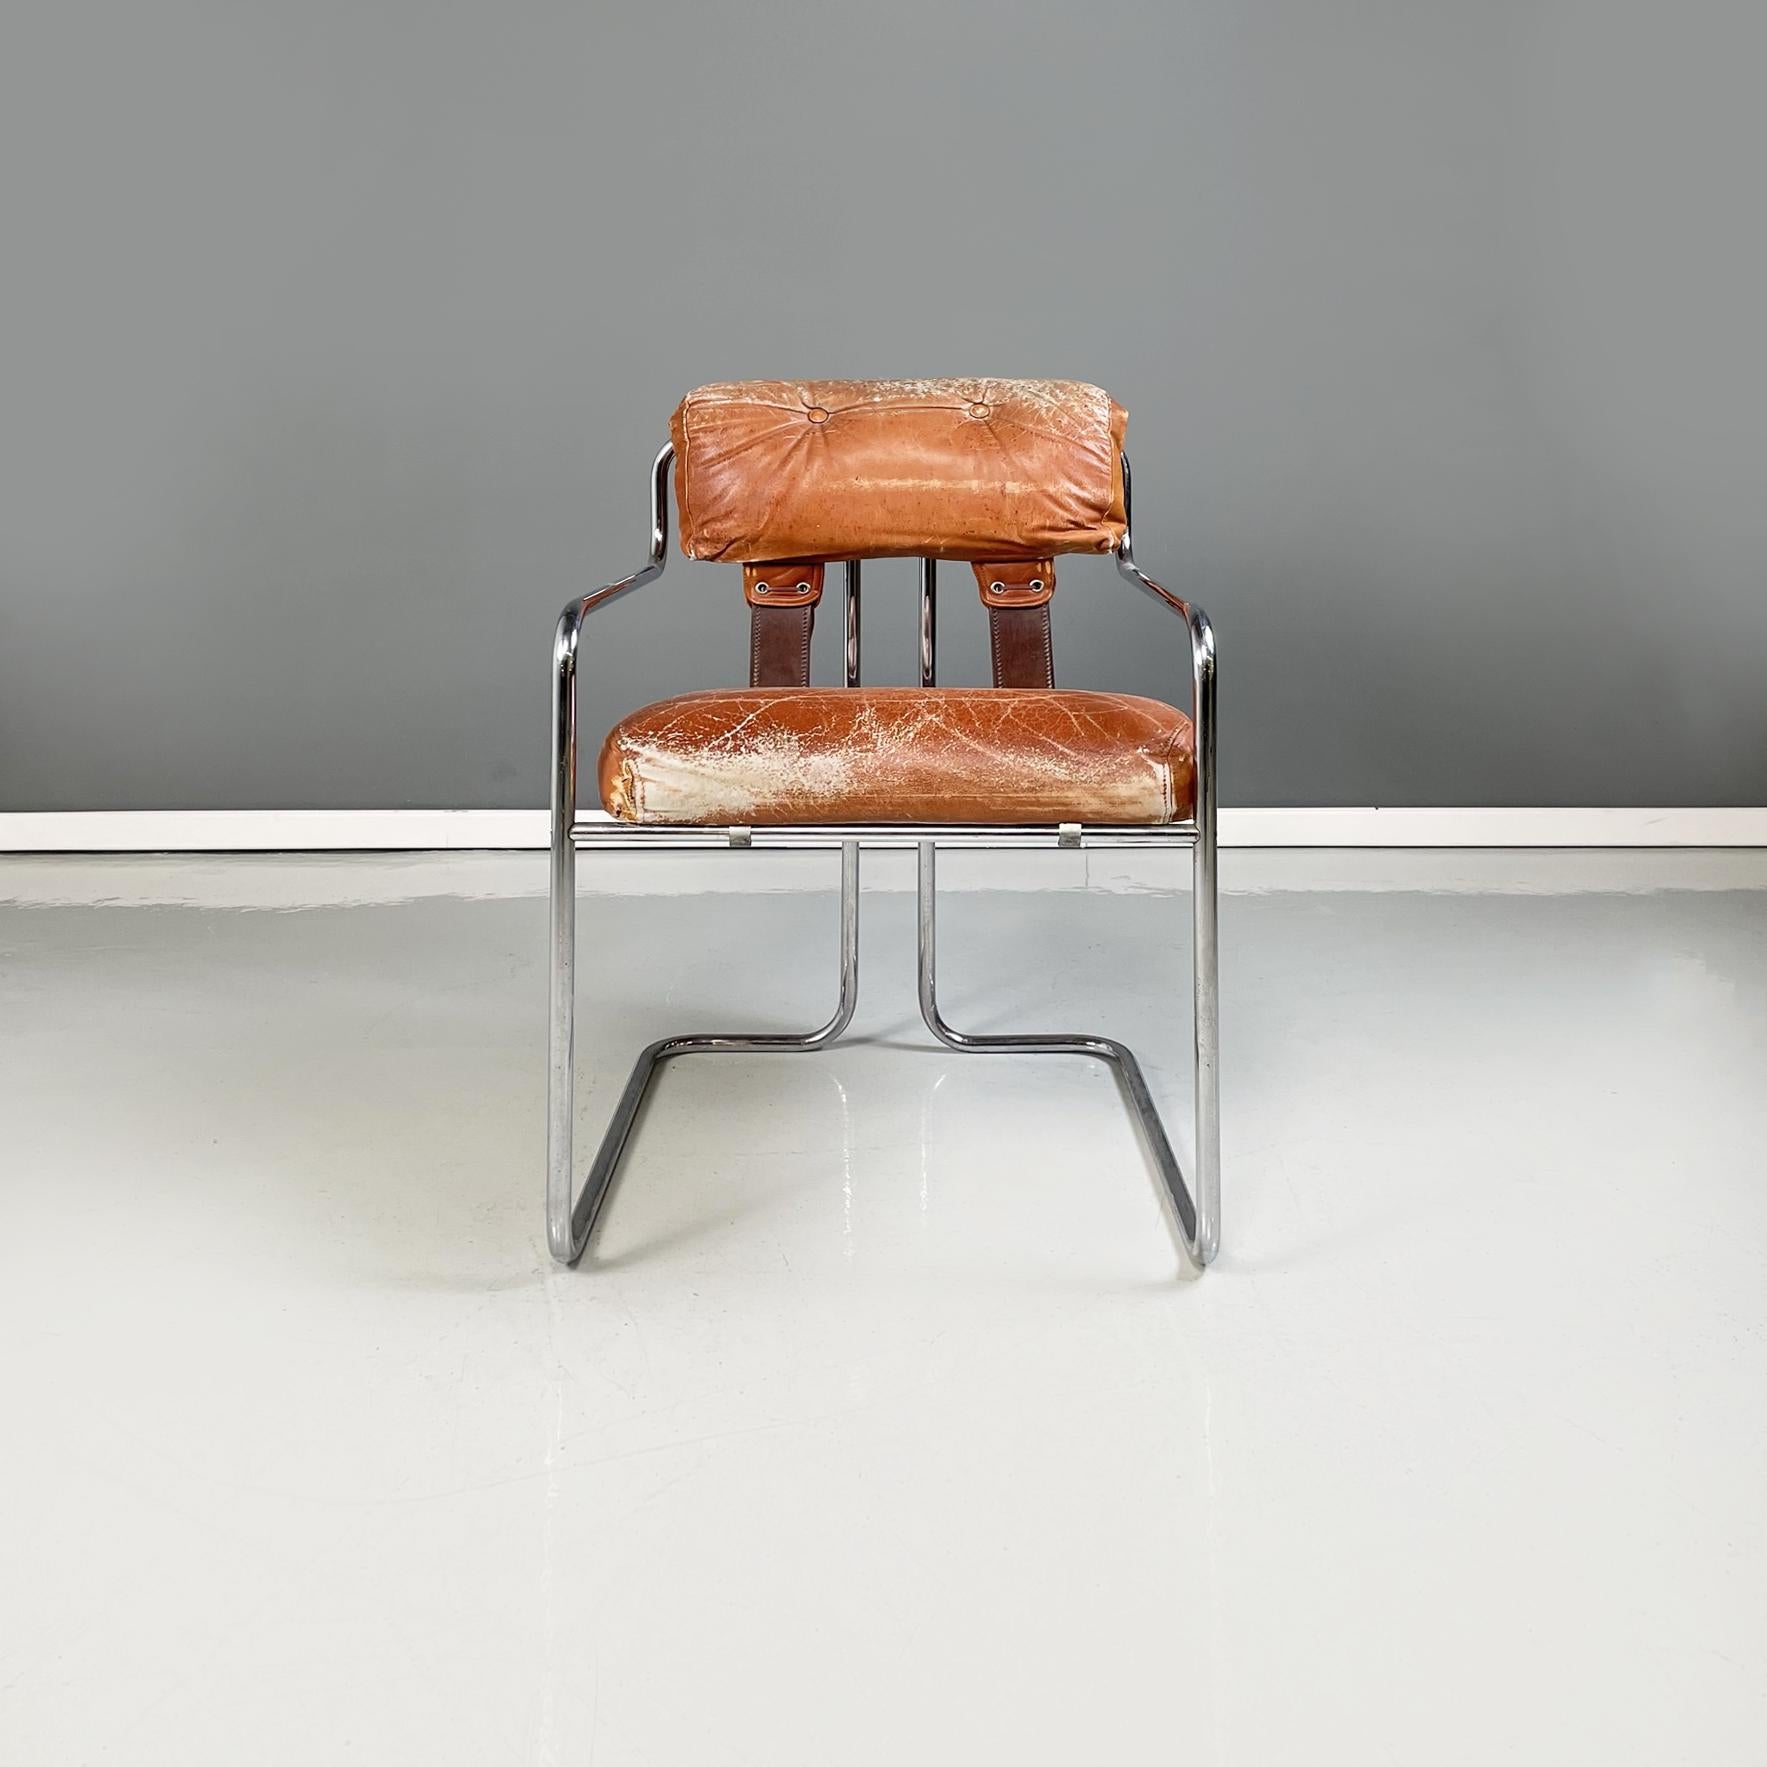 Italian modern brown leather and metal Chair Tucroma by Guido Faleschini for 4Mariani, 1970s
Chair mod. Tucroma with padded seat upholstered in brown leather. The backrest is composed of a padded cushion covered in brown leather and leather bands.